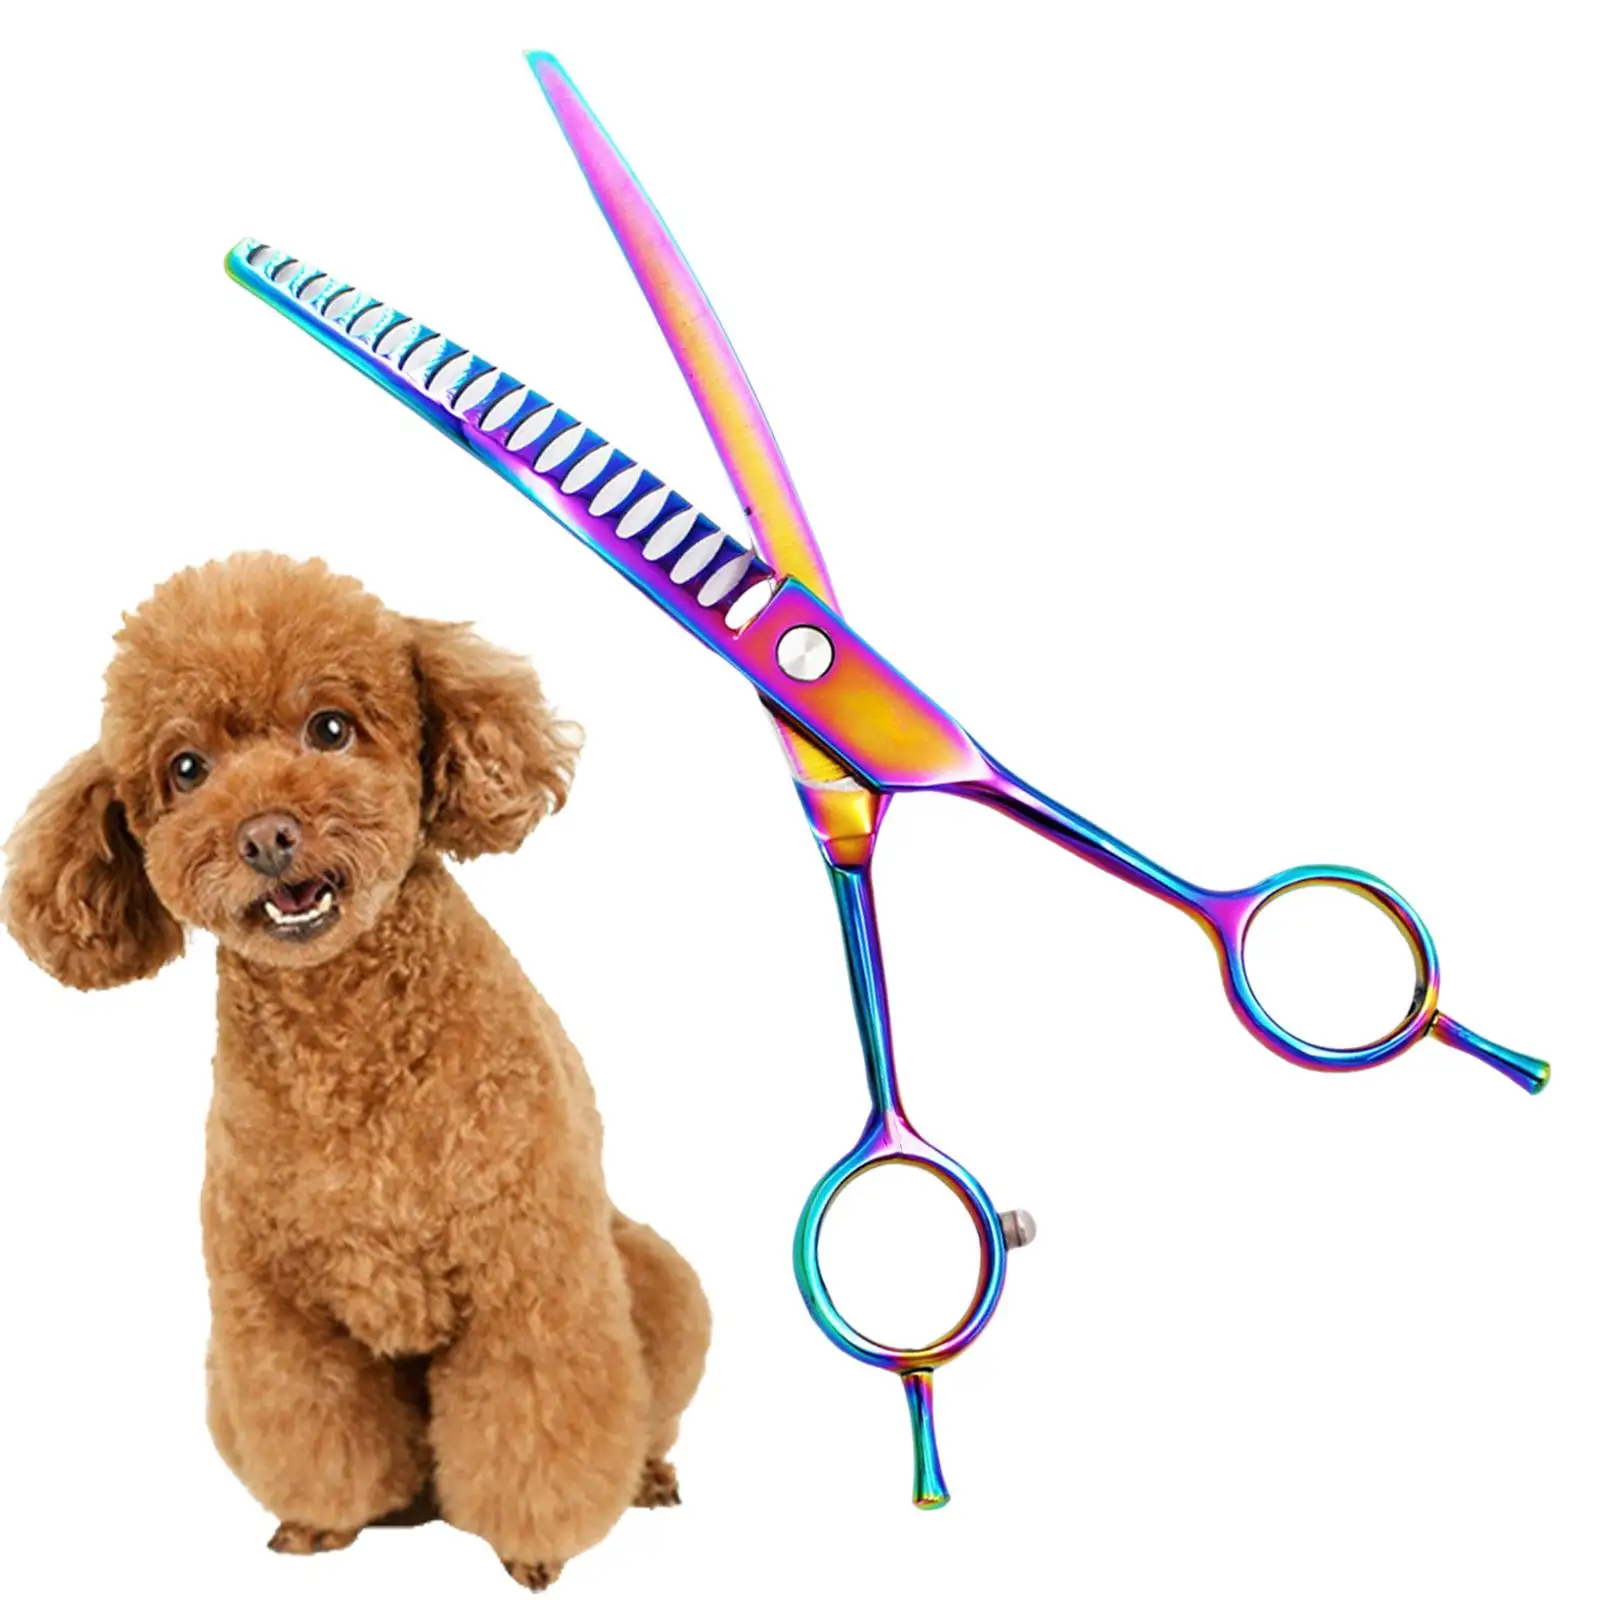 Curved Chunker Shears Hair Trimming Colorful Dog Thinning/Blending Scissors Dog Scissors for Grooming for Cat Home Use Salon